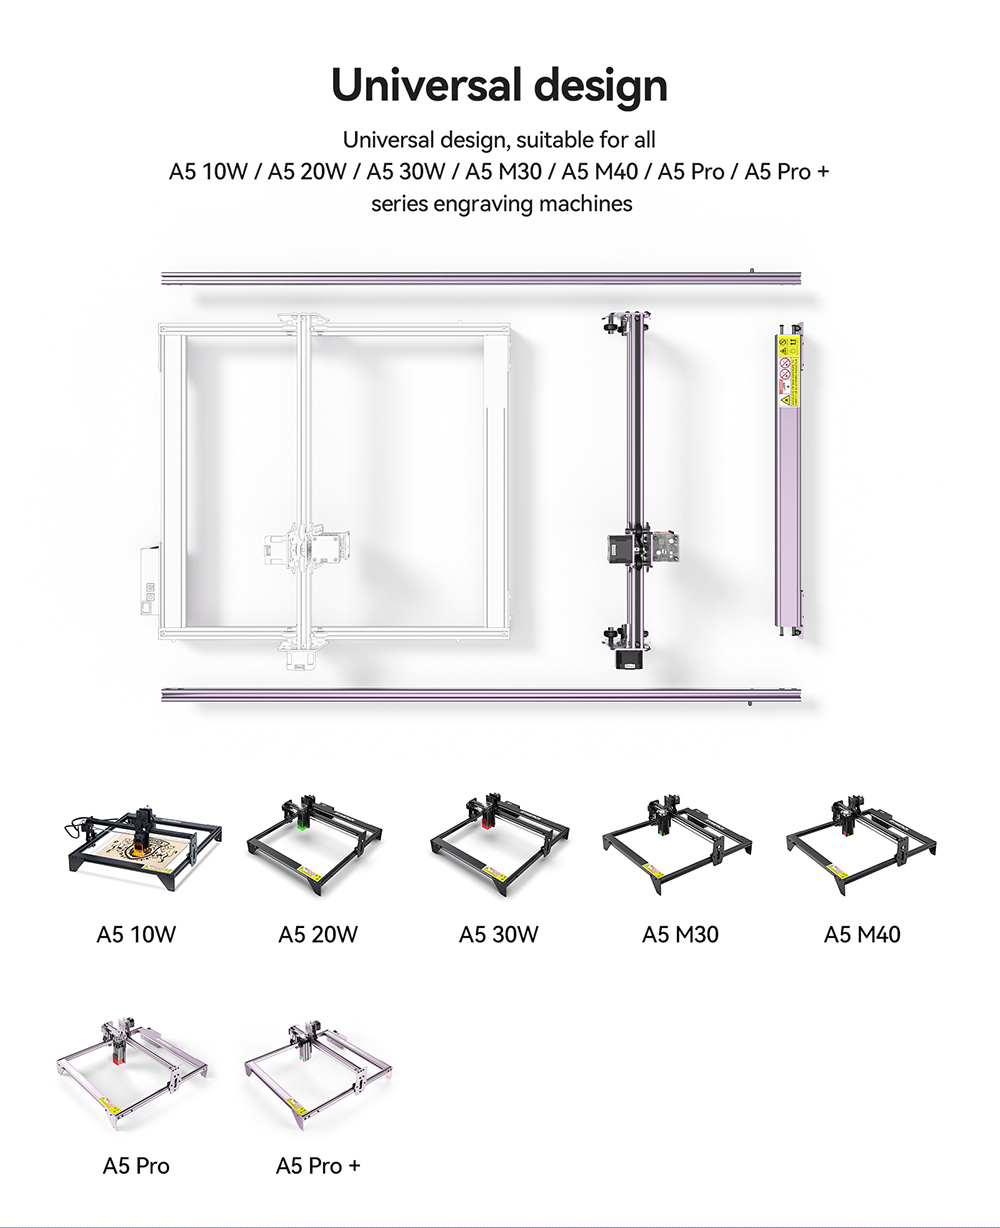 ATOMSTACK Engraving Area Extension Kit for A5 Pro / A5 Pro+ Laser Engraving Machine, 850x410mm Engraving Area